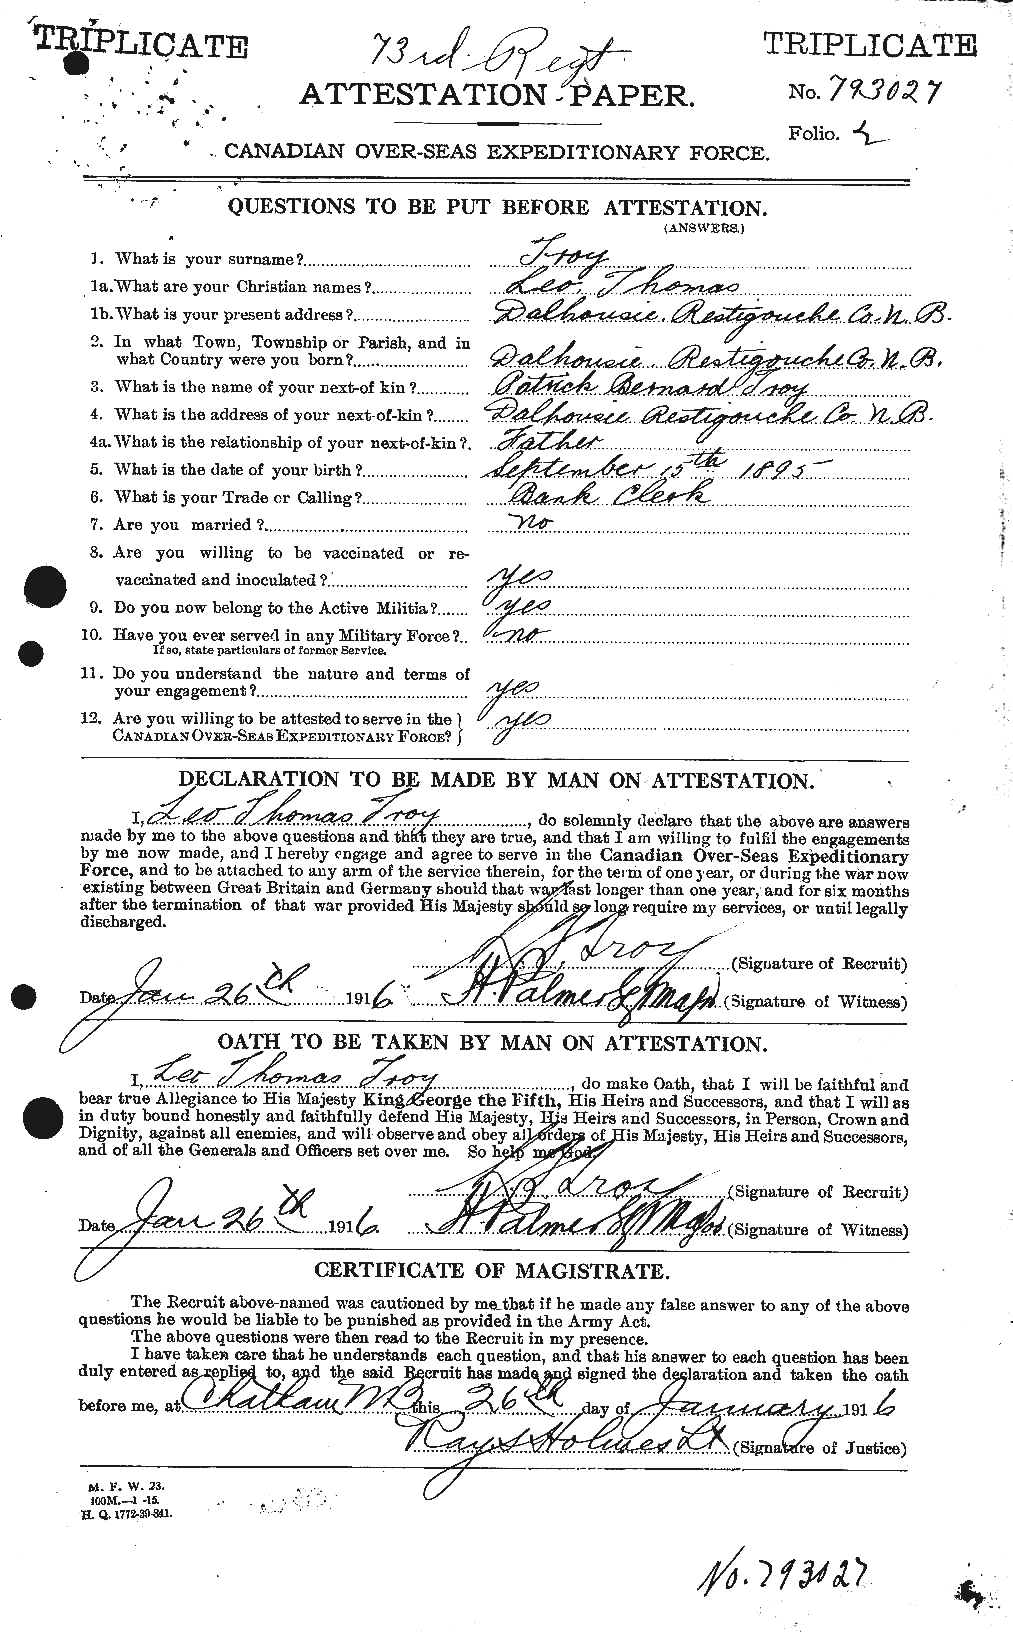 Personnel Records of the First World War - CEF 641859a